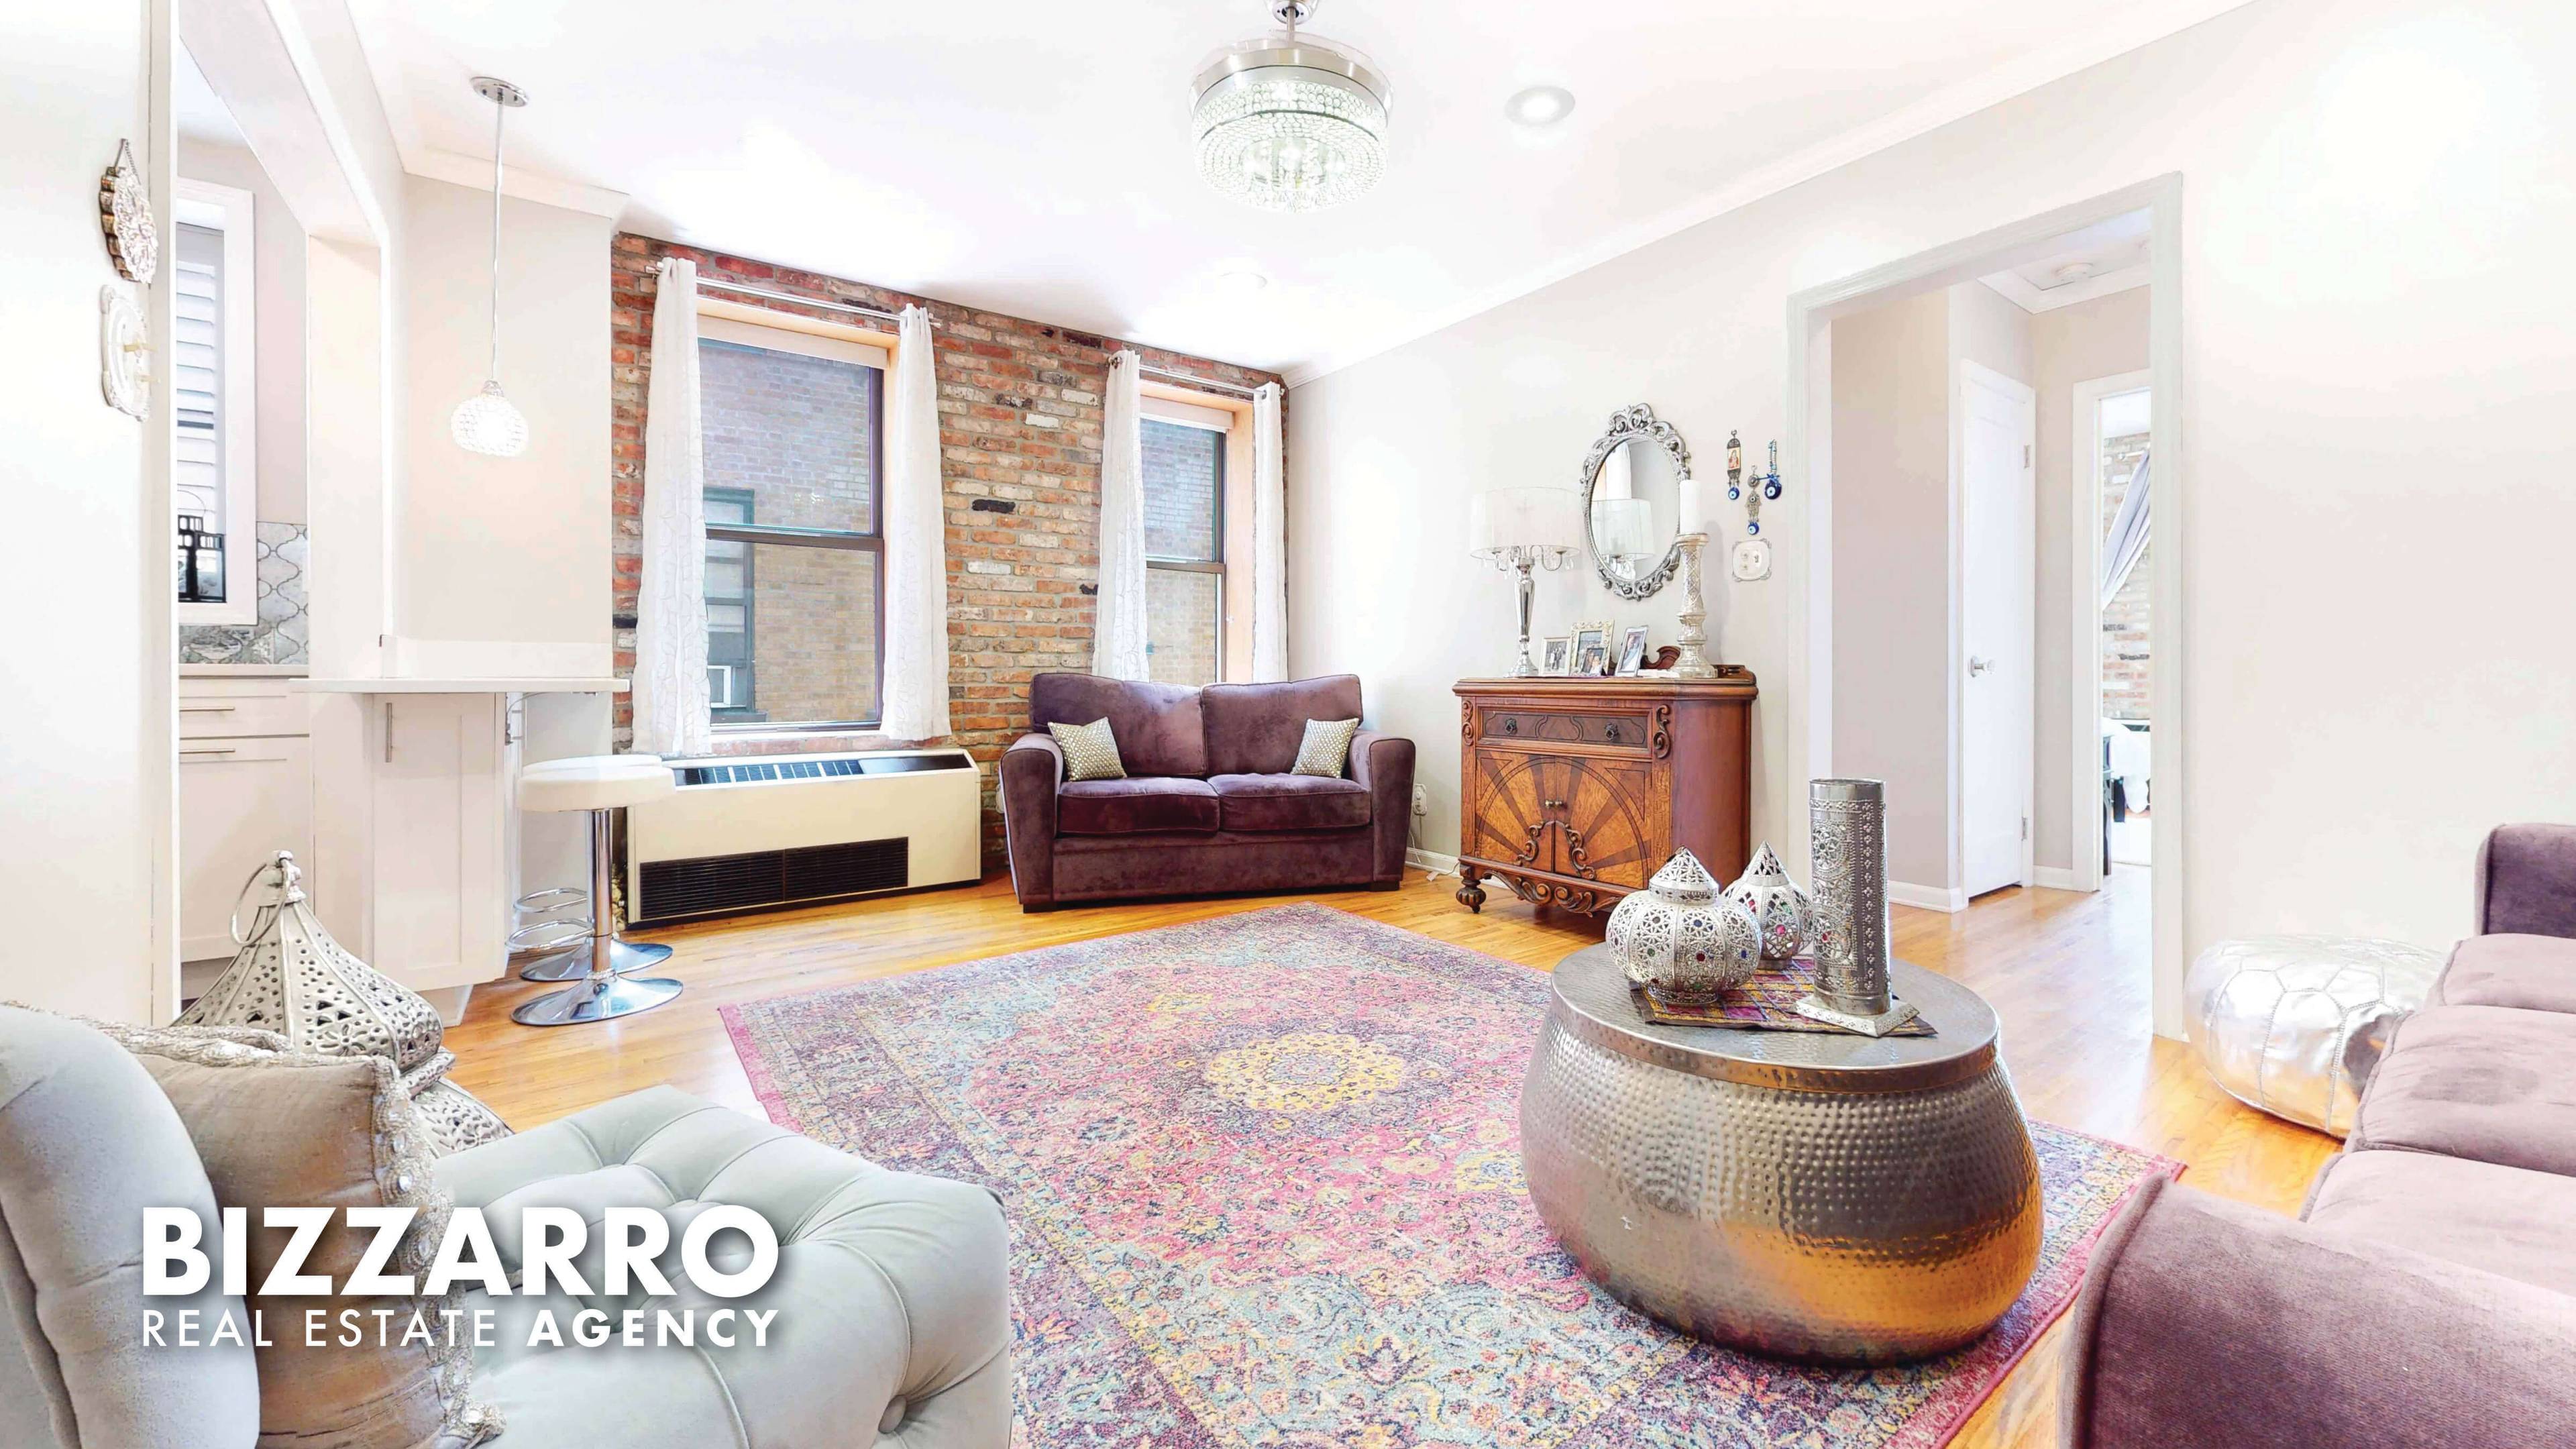 Renovated 1BR condo ! ! This extraordinary apartment in the heart of Inwood has been renovated and remodeled with meticulous care.